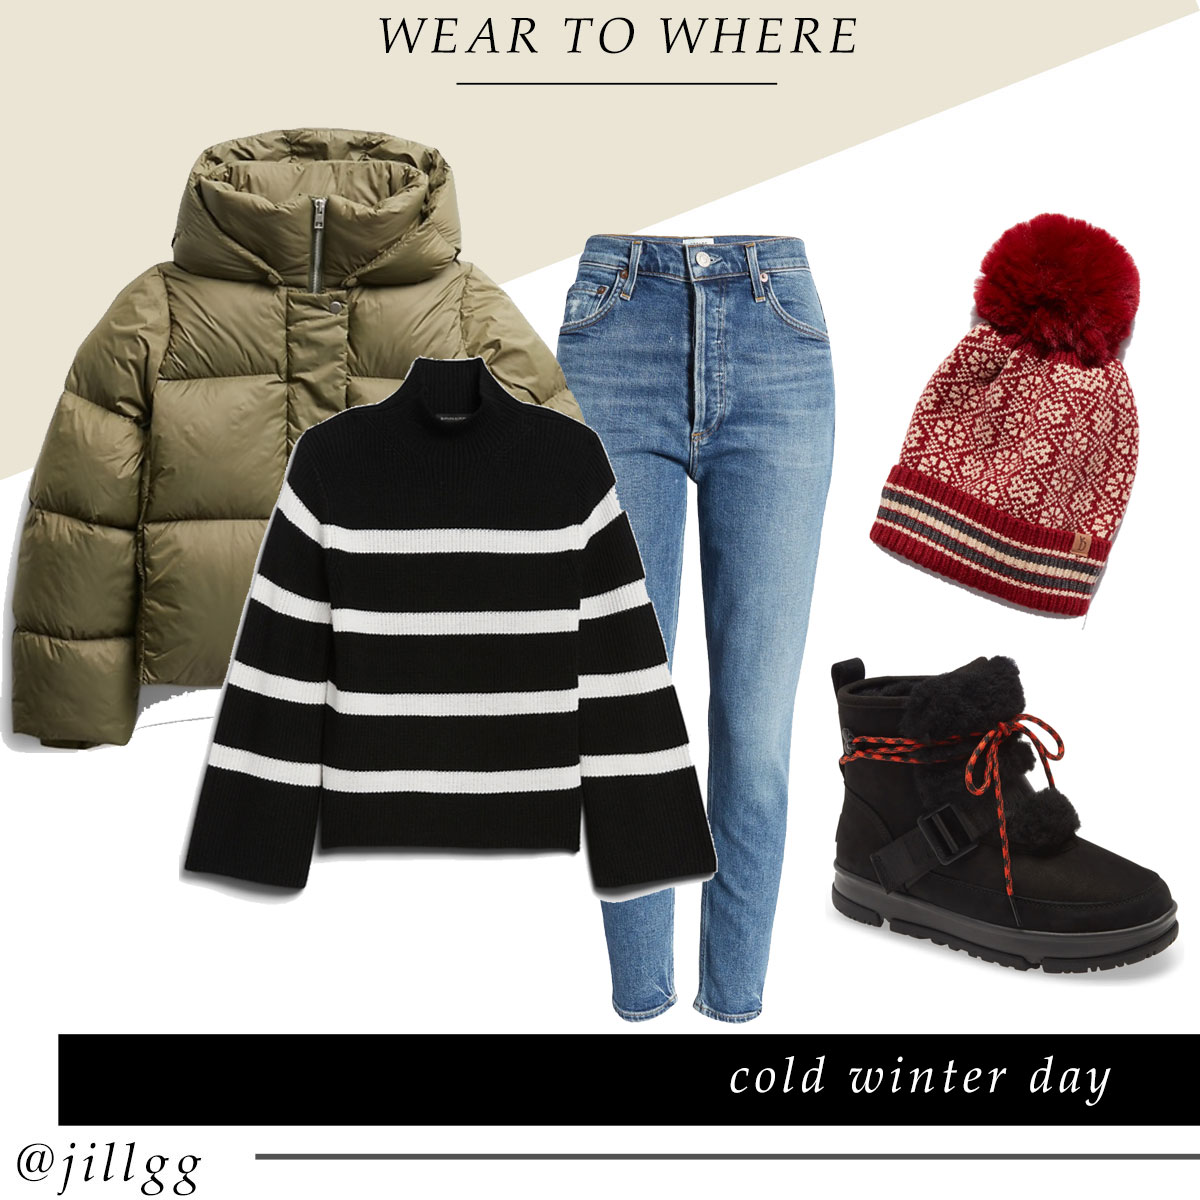 Winter Outfits to Wear Based on Your Zodiac Sign